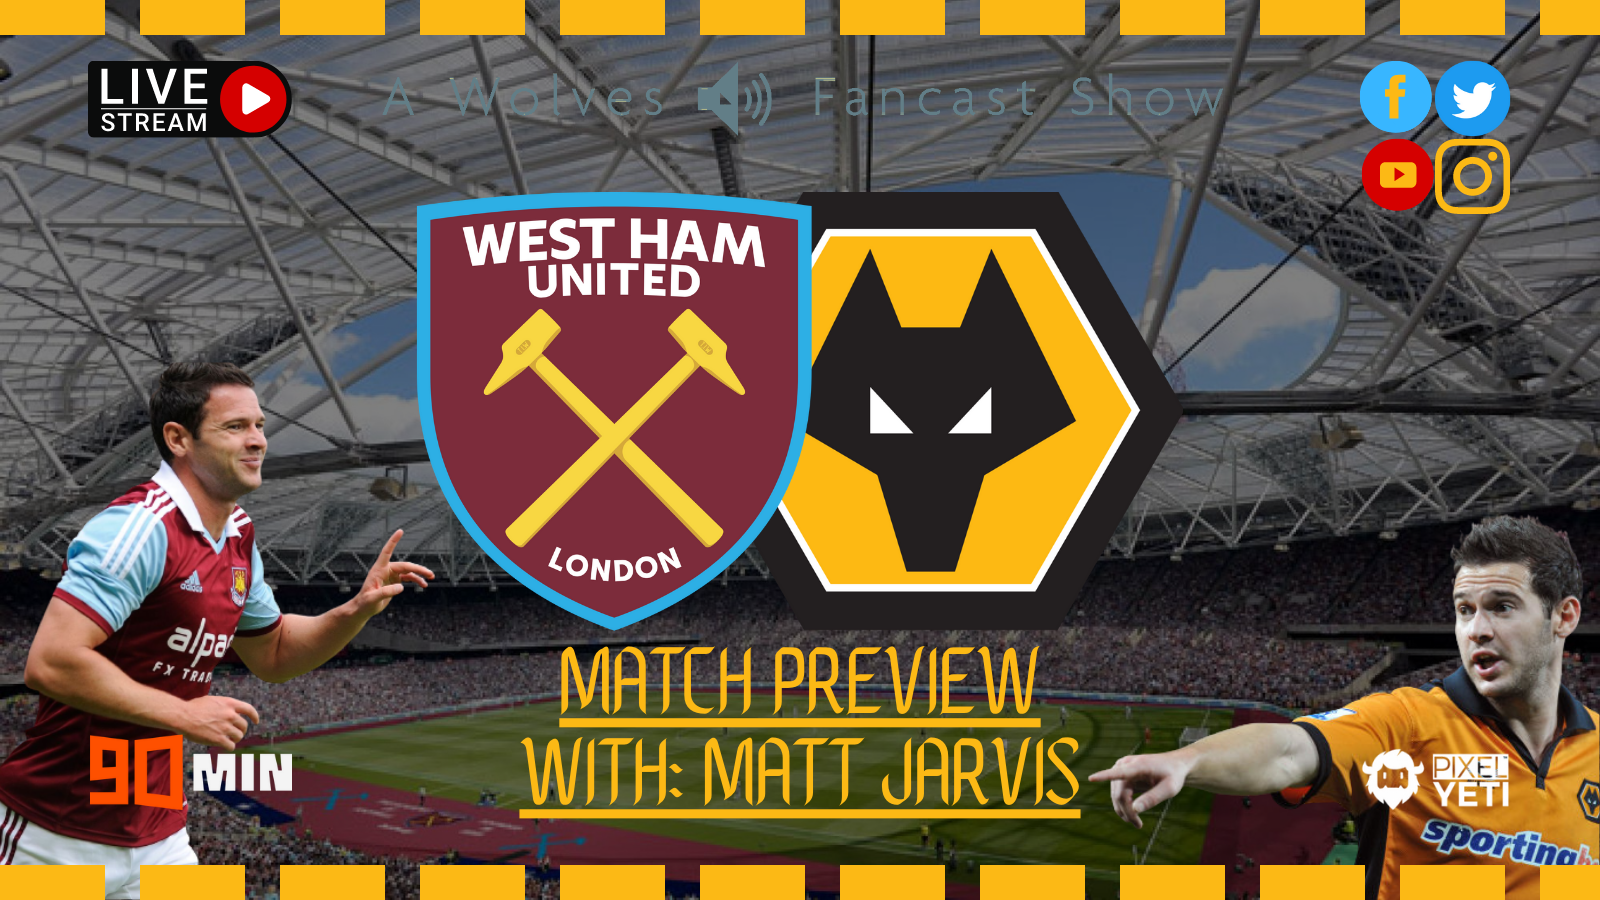 West Ham Wolves Preview, With Matt Jarvis